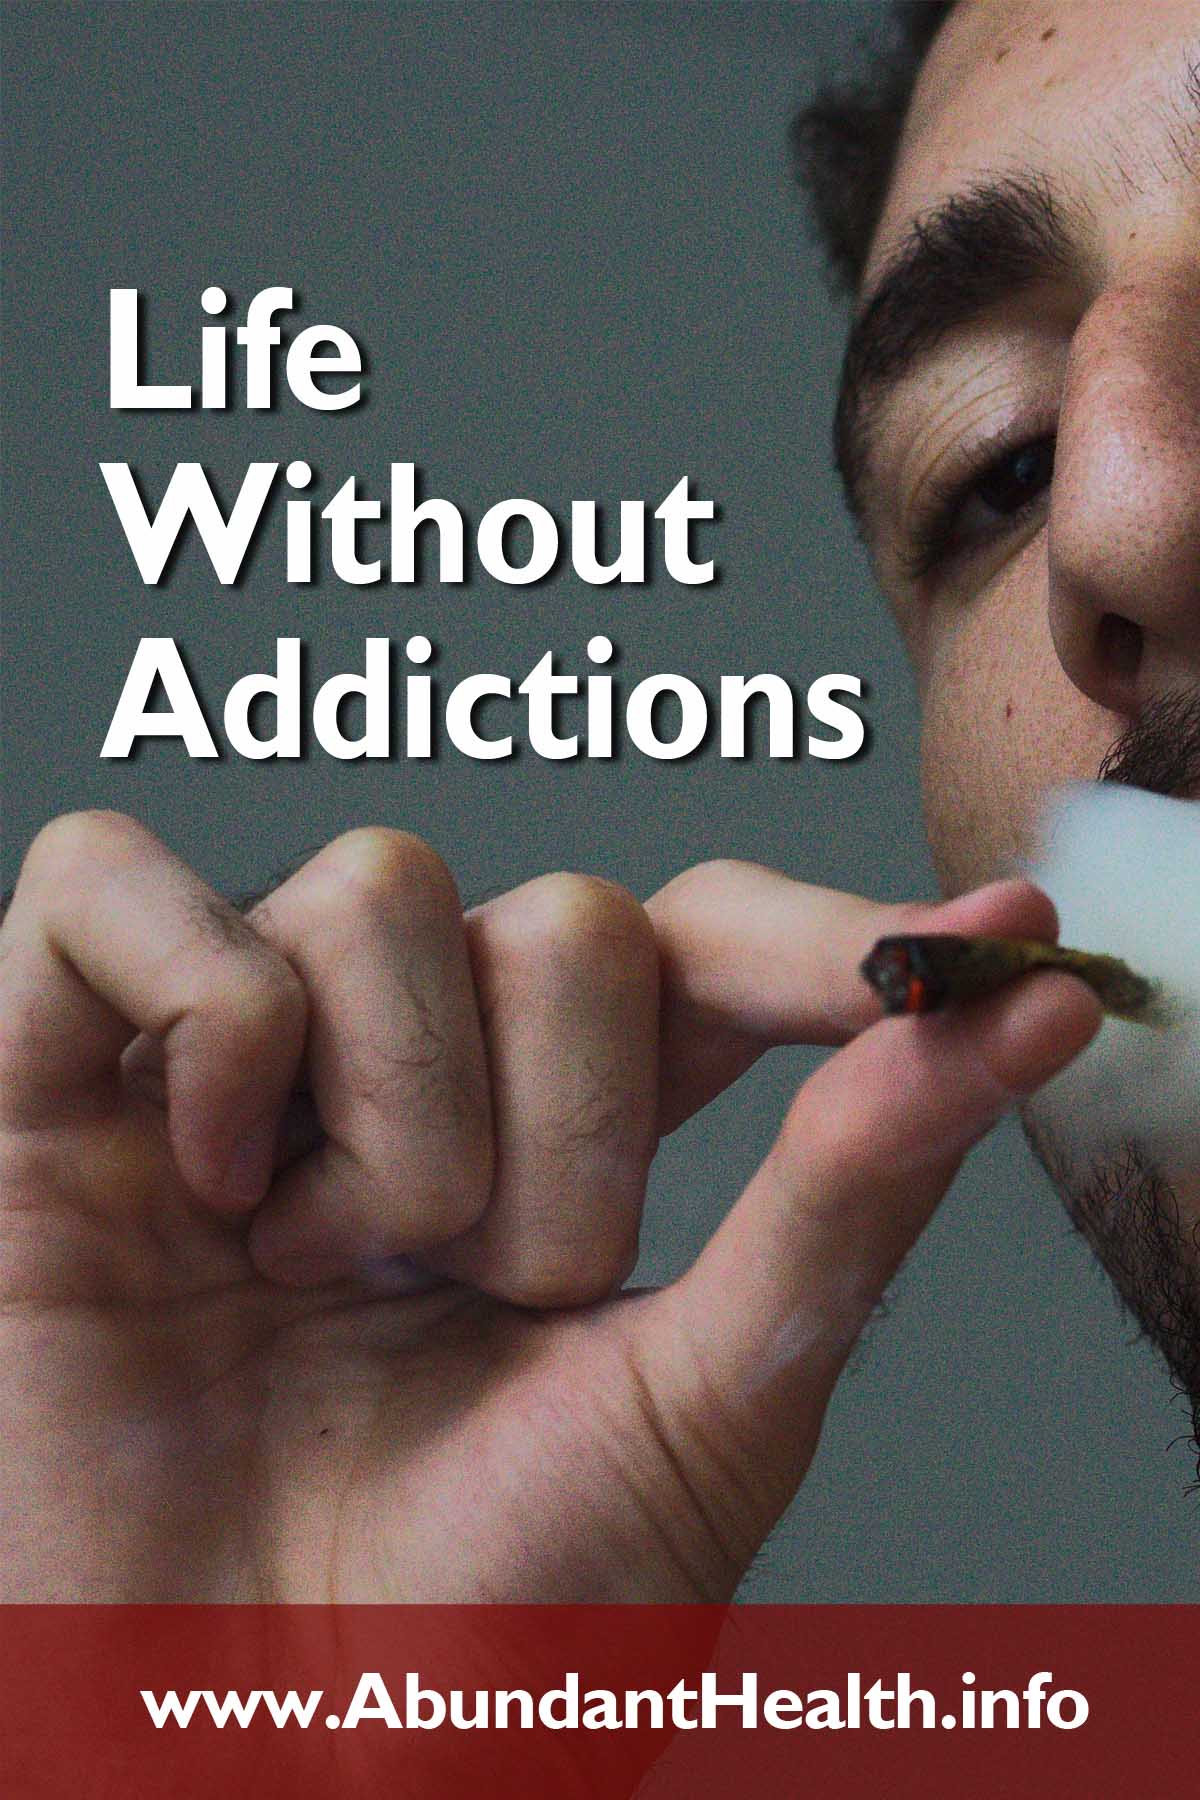 Life Without Addictions